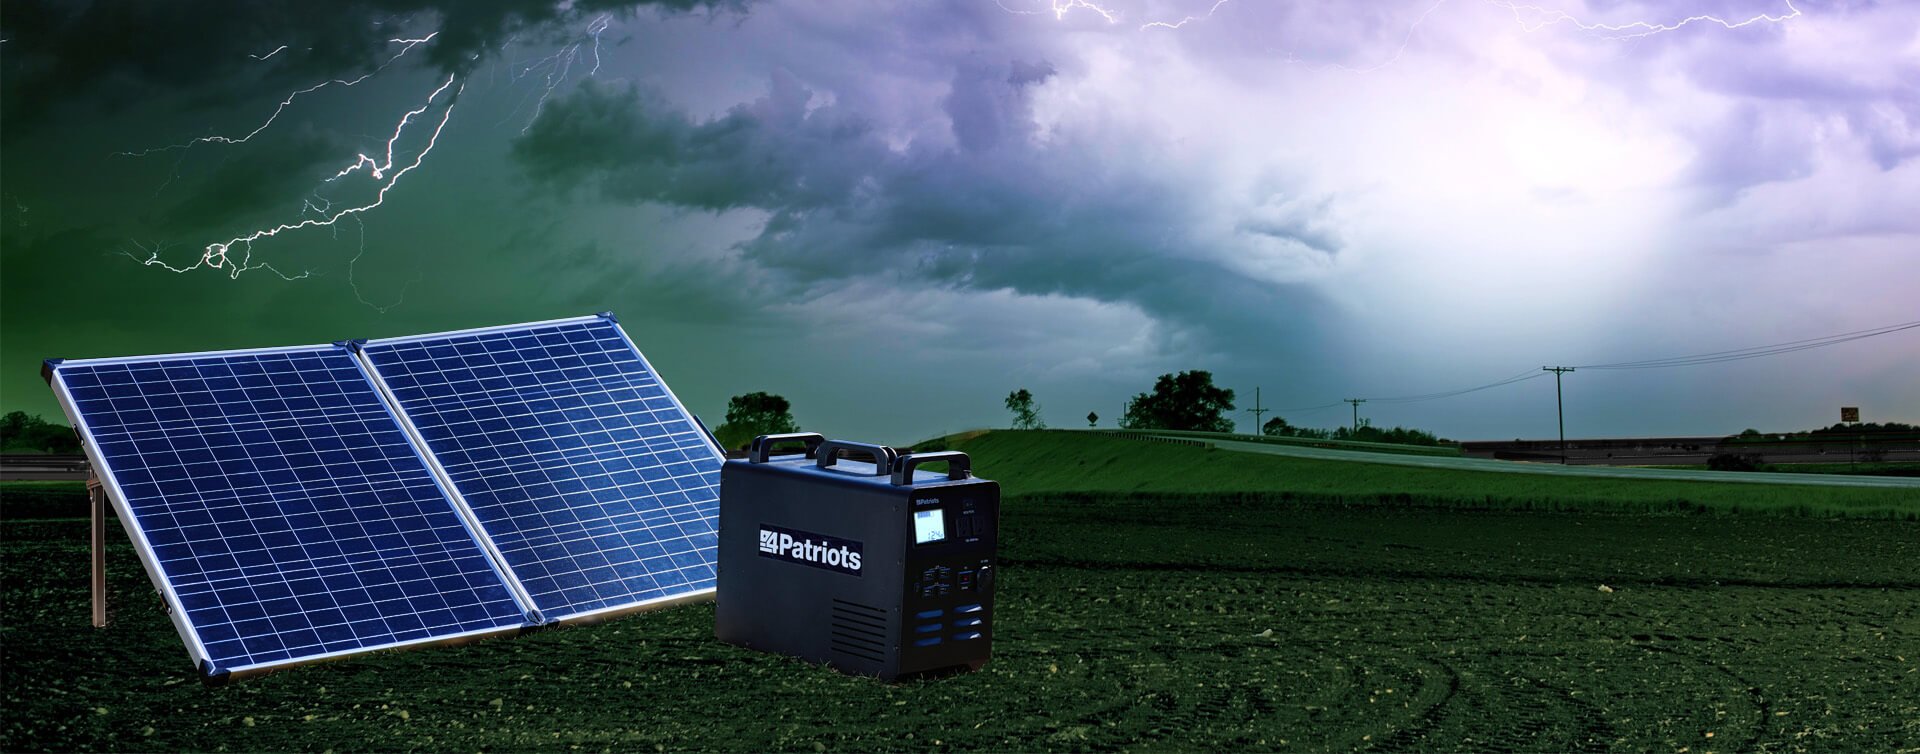 PPG and solar panels setting in field with storm behind